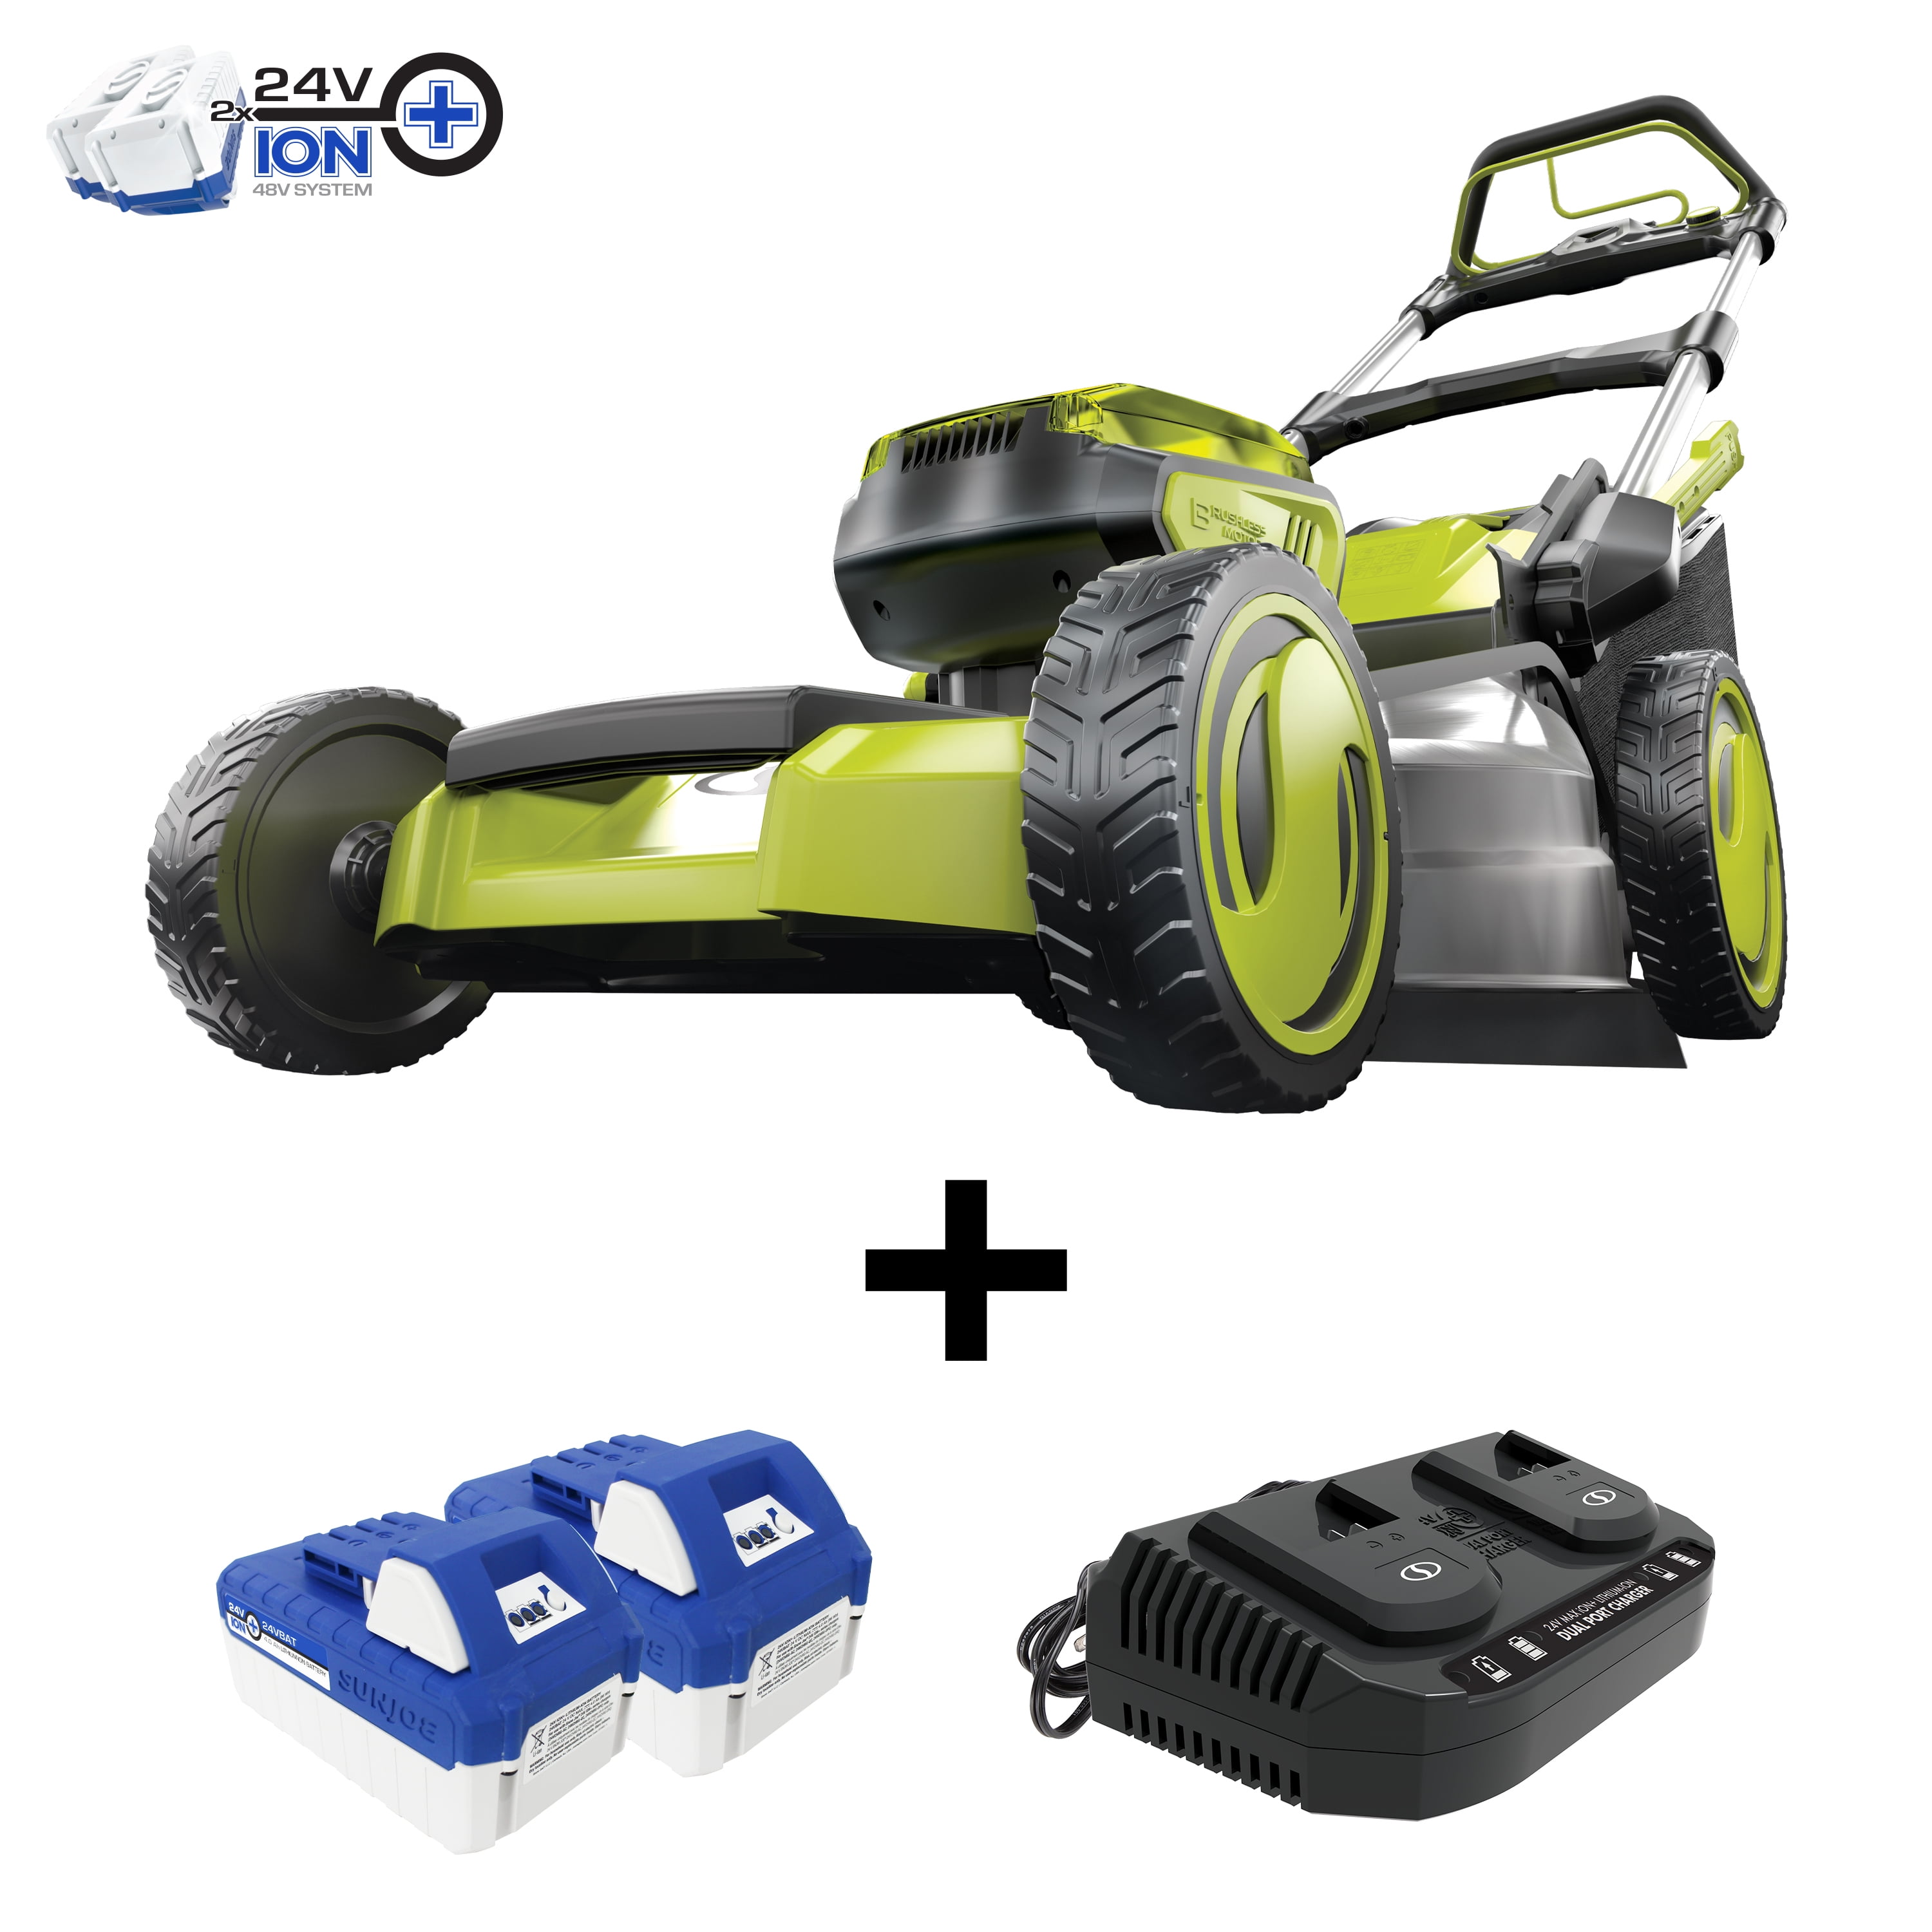 Sun Joe 24V-X2-16LM 48-Volt iON+ Cordless Brushless Lawn Mower Kit Dual Port Charger & 12-Gallon Collection Bag One Touch 6-Position Height Adjustment Comfort Grip 16-Inch W/ 4.0-Ah Battery 